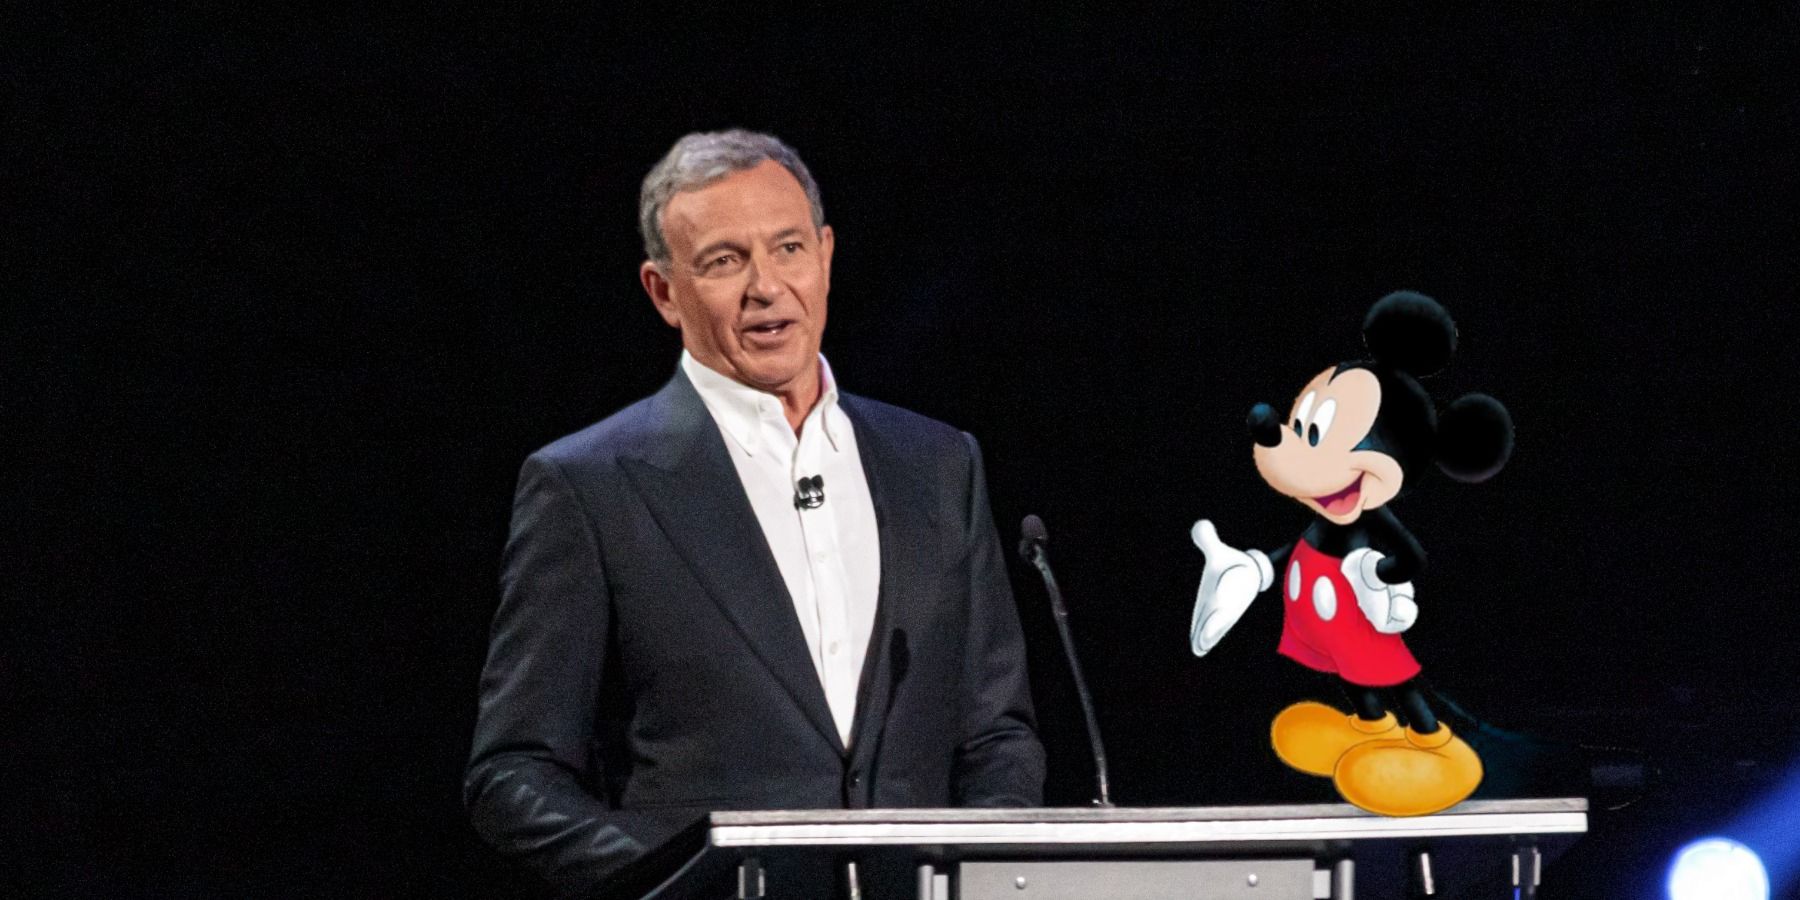 Bob Iger at DIsney Expo 2019 with Mickey Mouse cutout